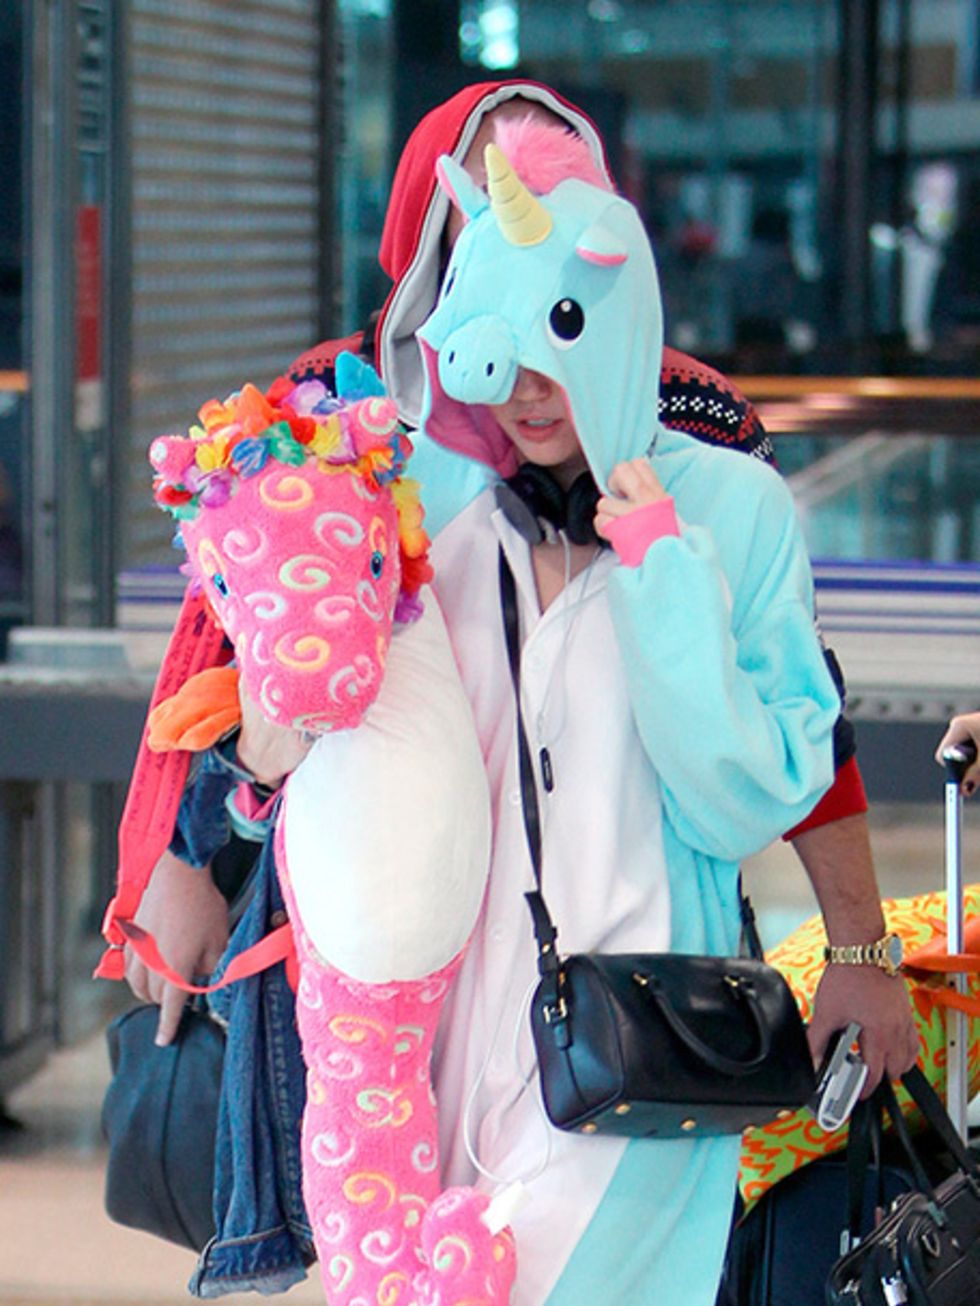 <p><strong>A unicorn onesie</strong></p>

<p>With complementary oversized seahorse doll.</p>